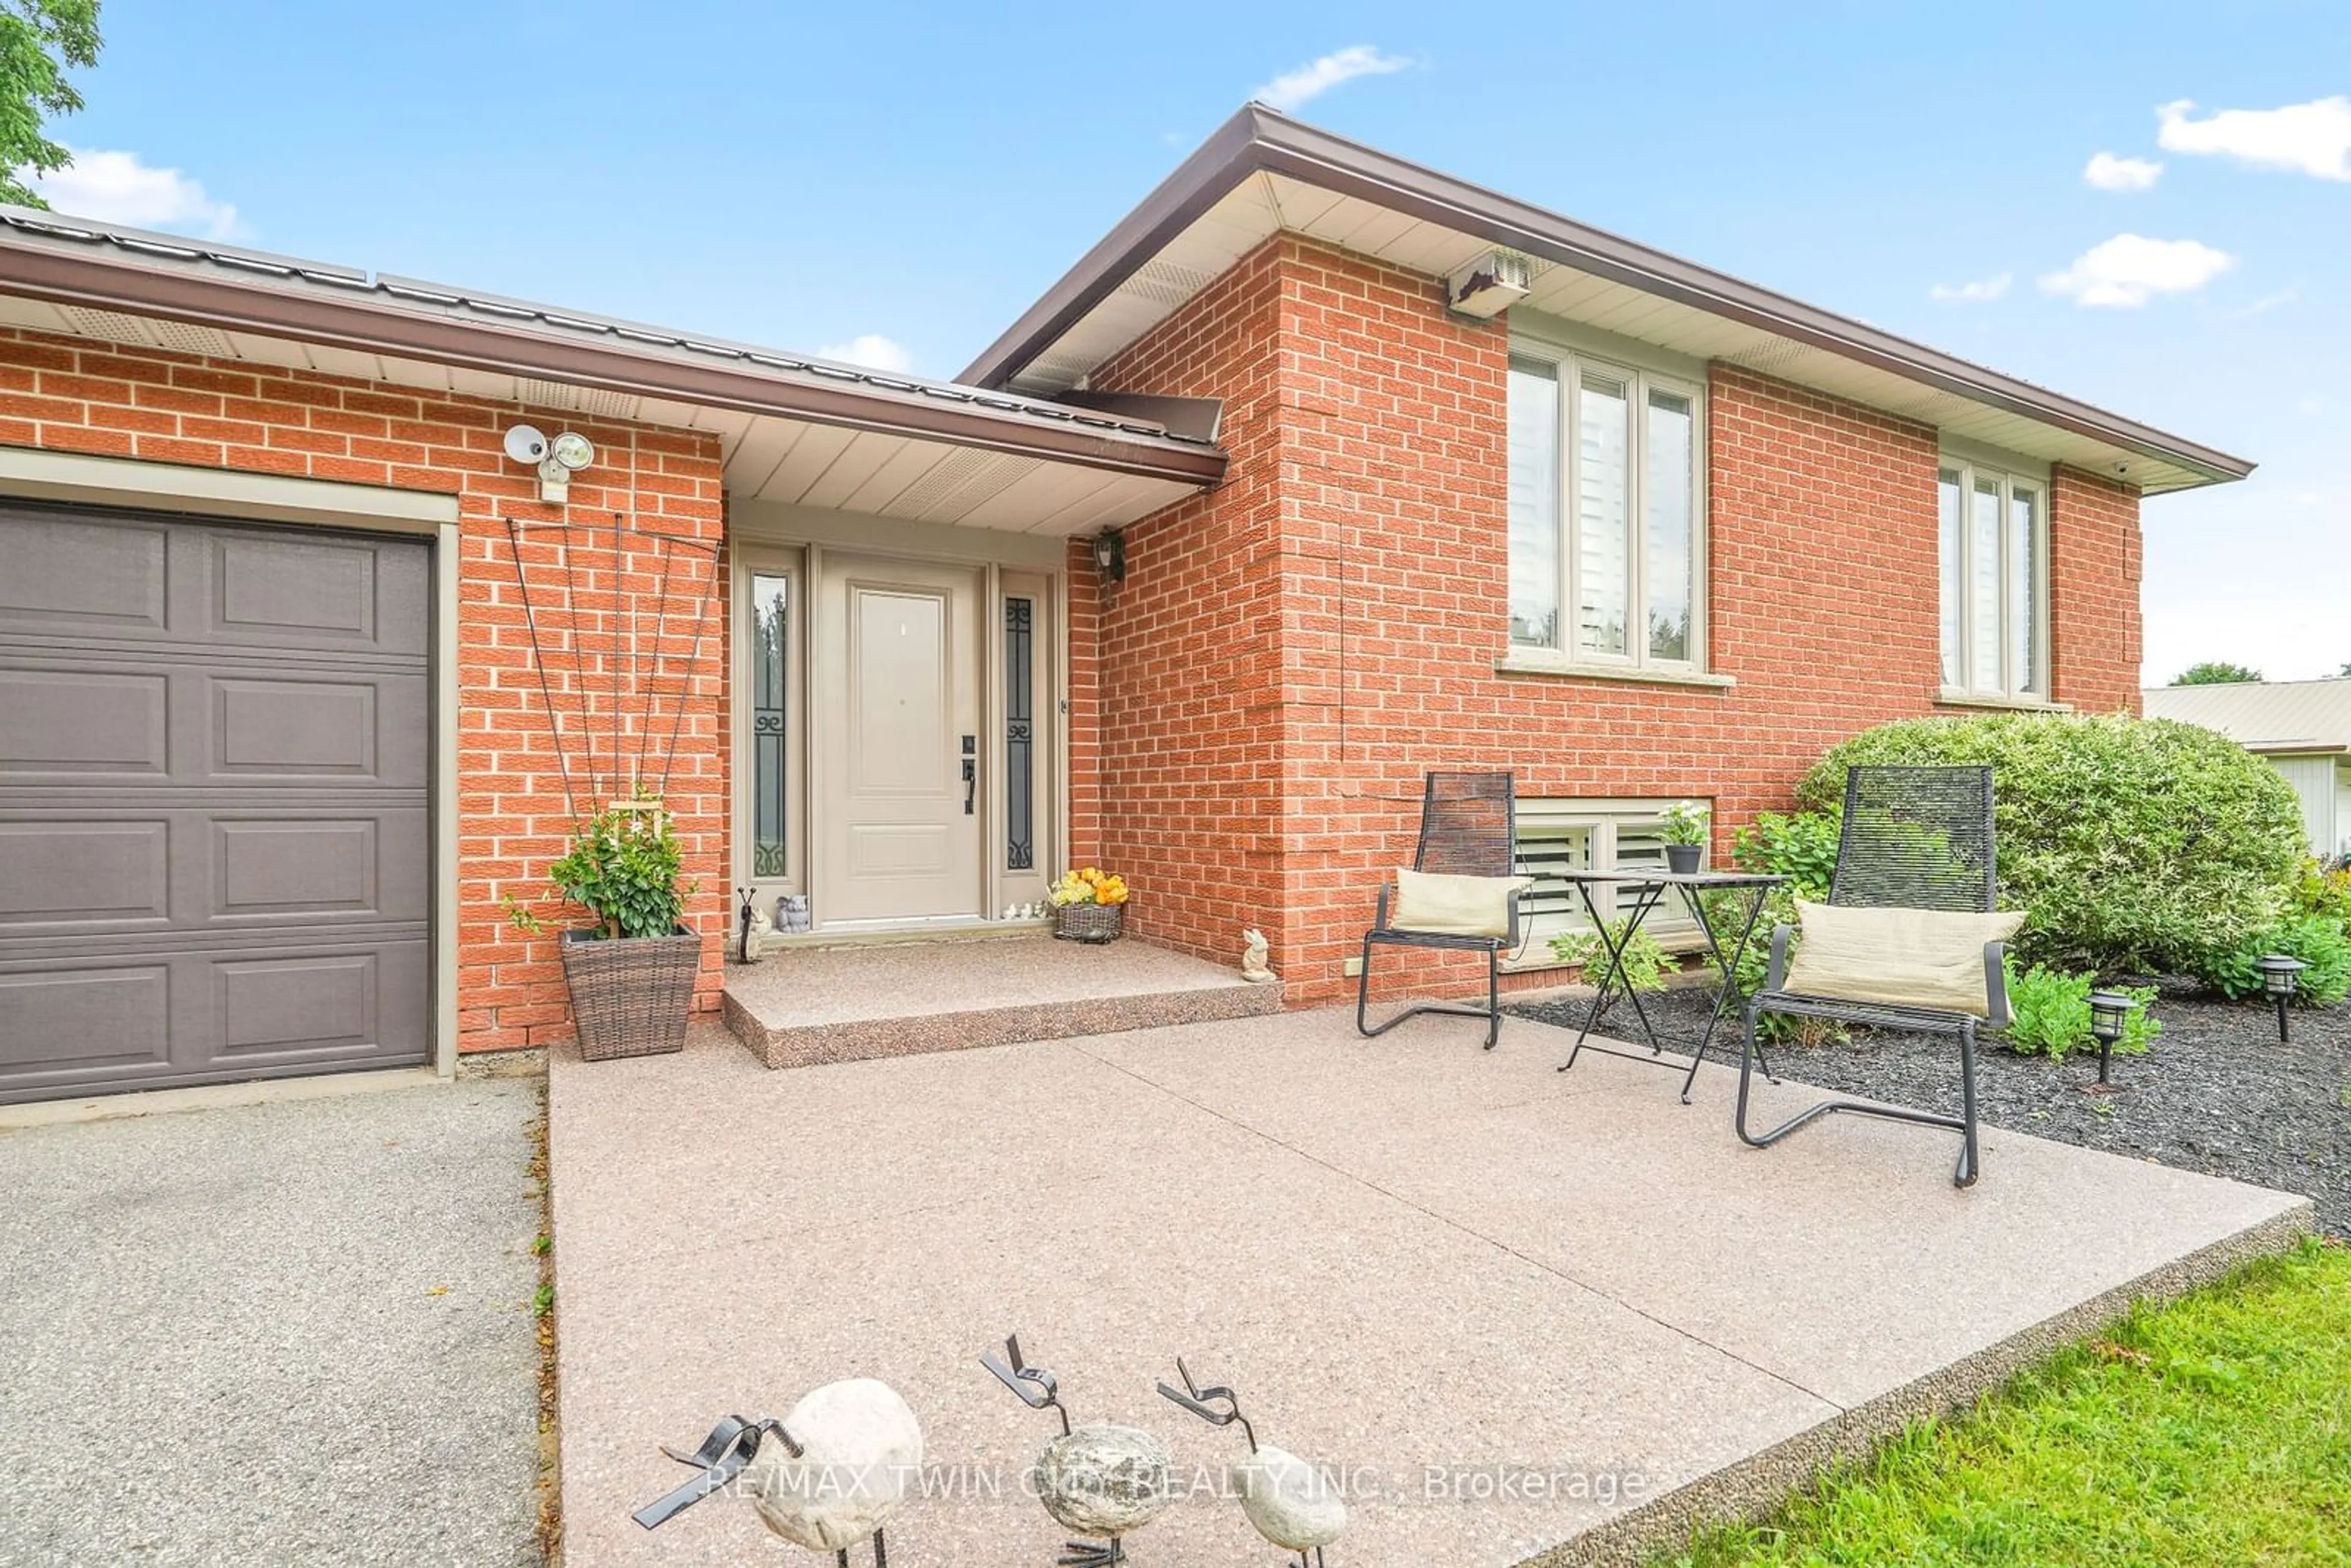 Home with brick exterior material for 183 McGill Rd, Brant Ontario N0E 1K0